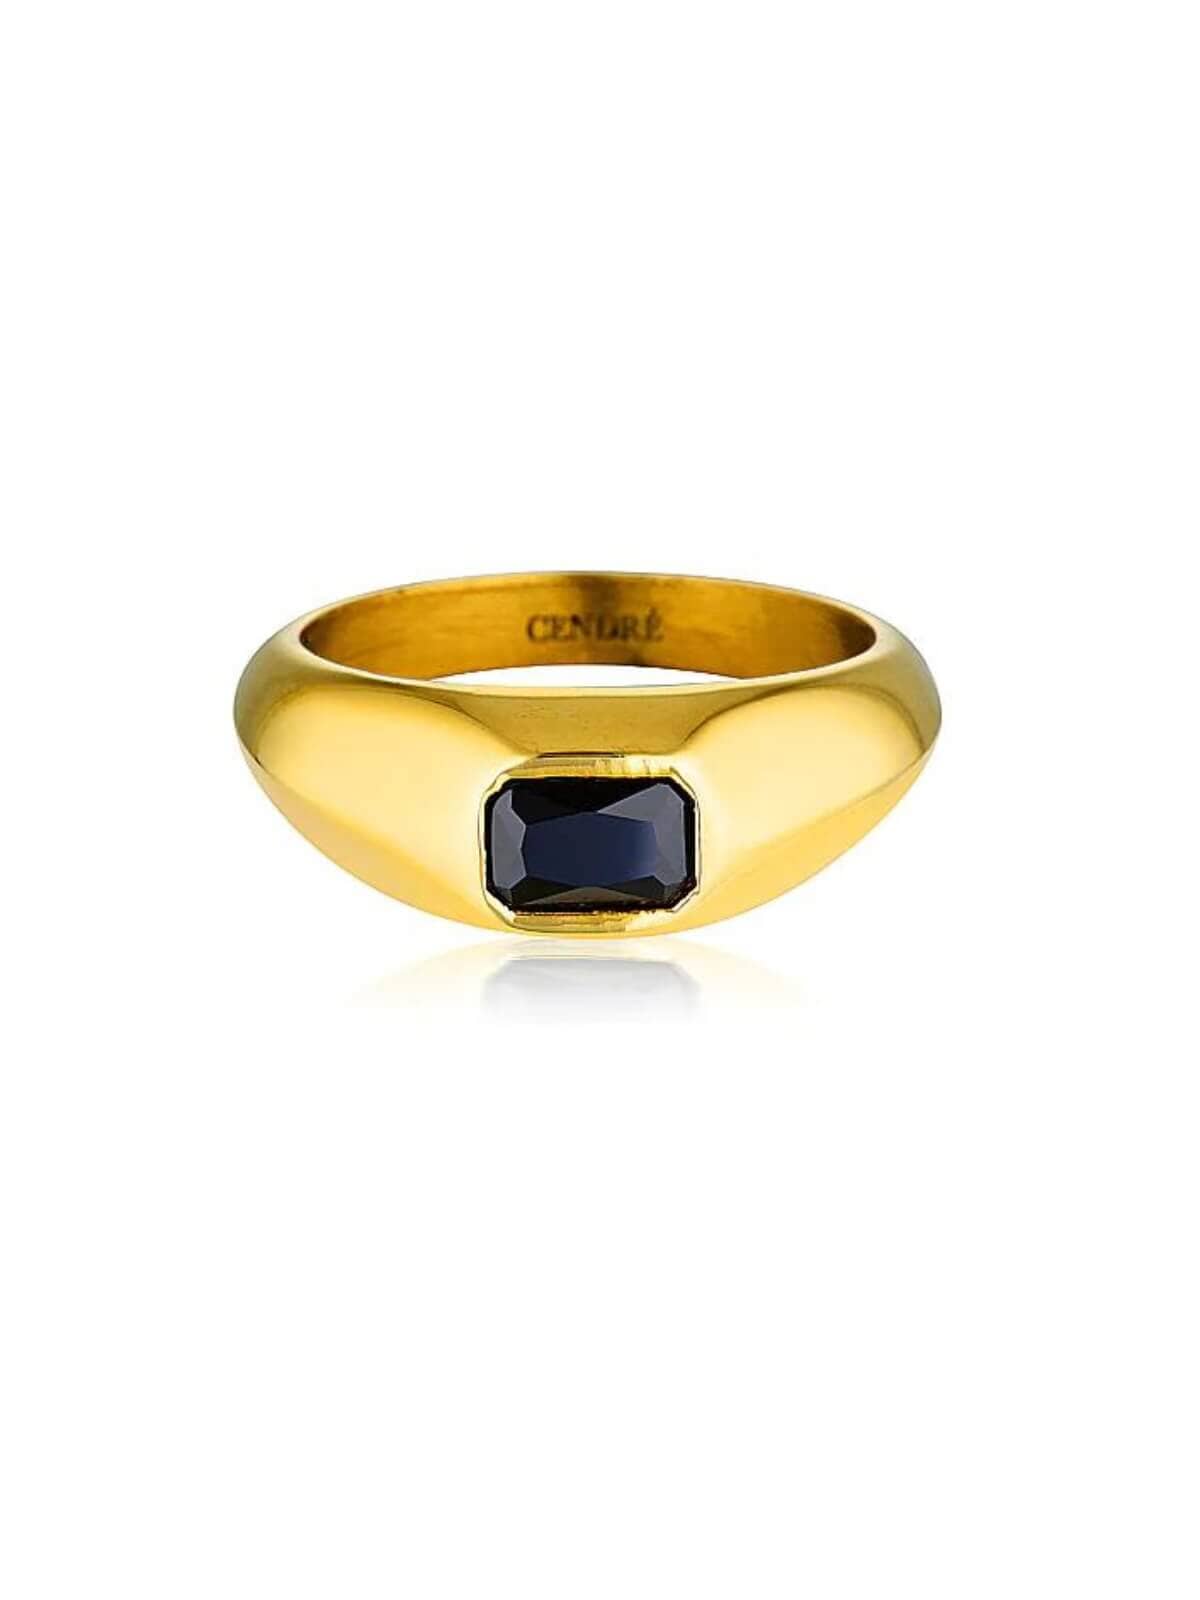 Cendre | Bowie Onyx Ring - Gold | Perlu 